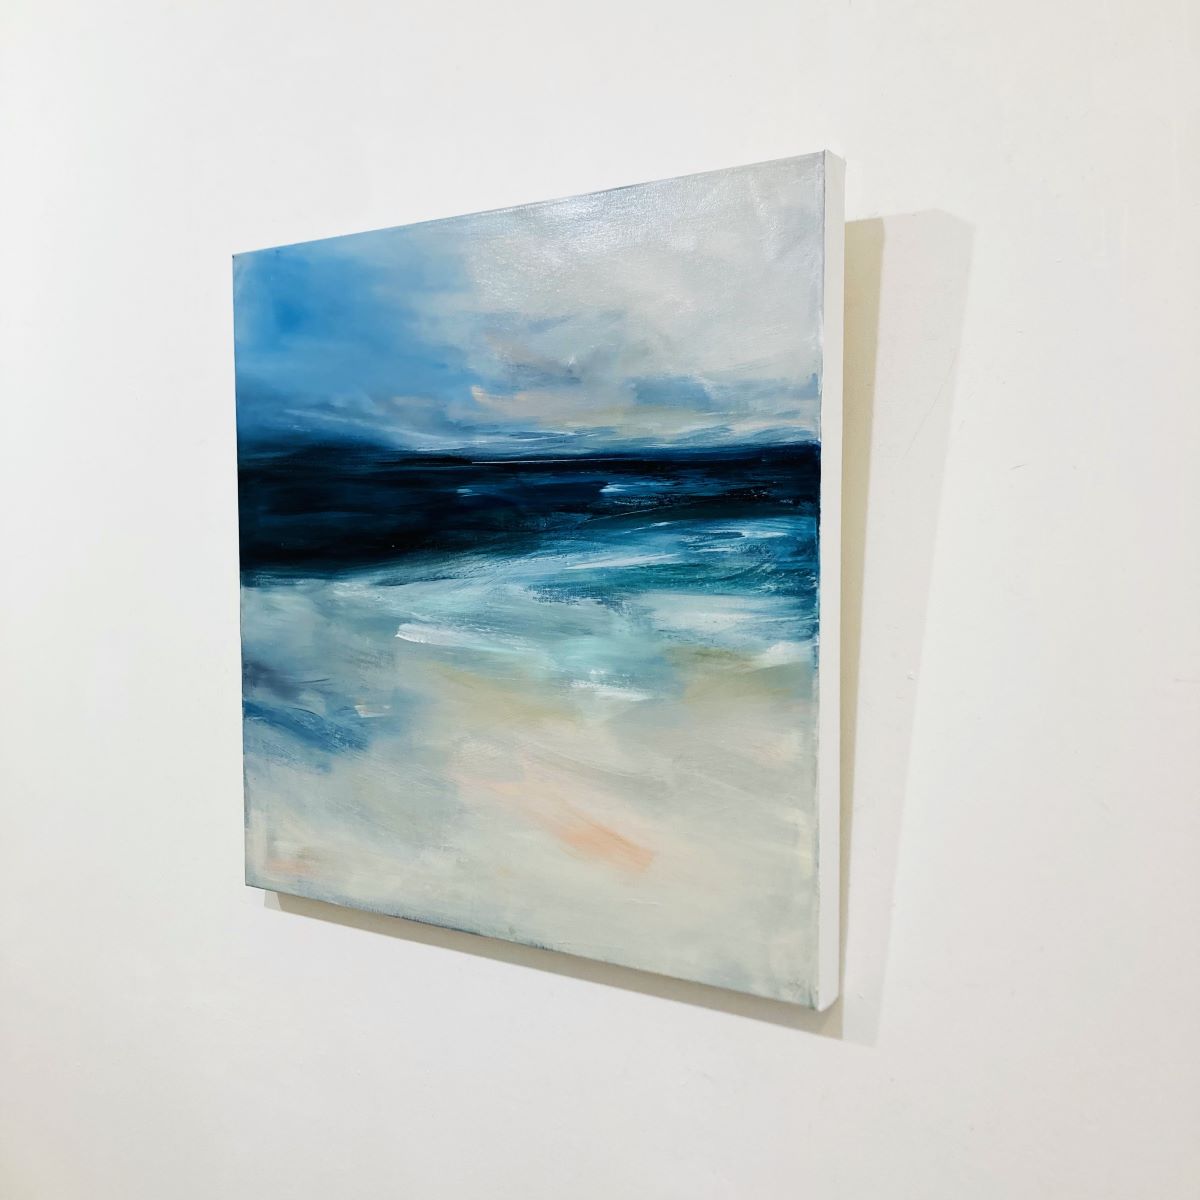 'Sounds of the Sea I' by artist Shona Harcus